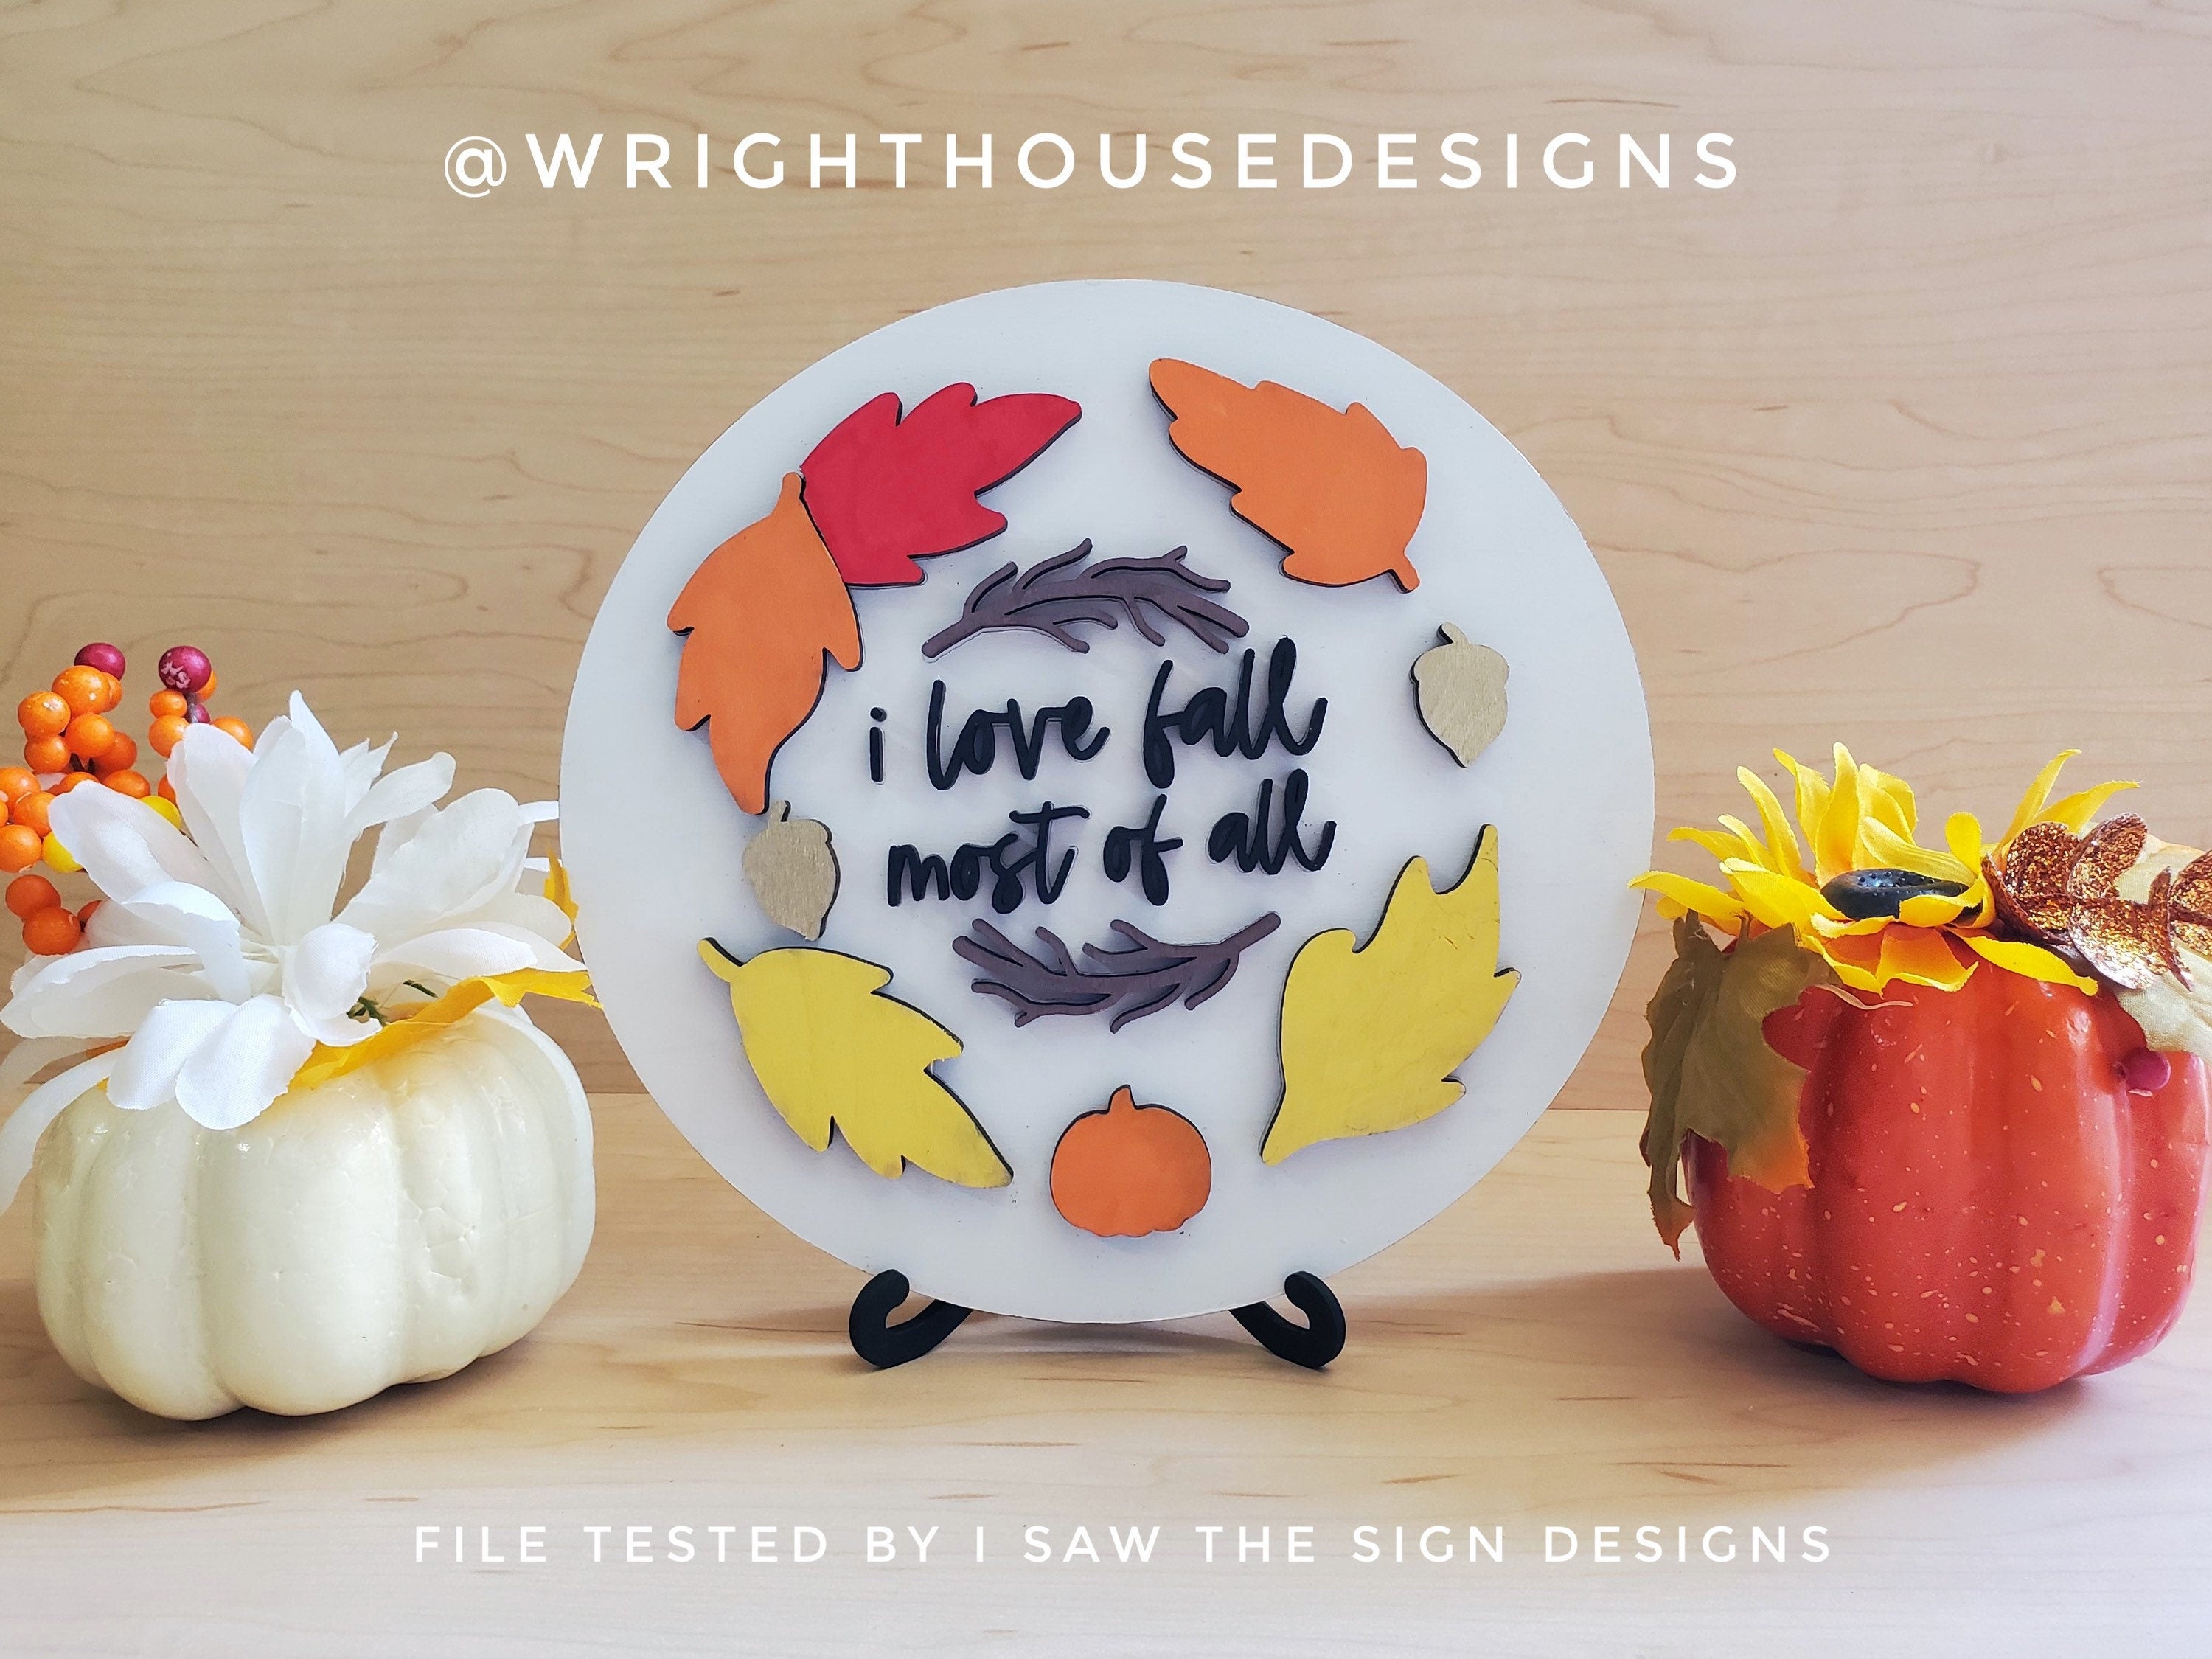 DIGITAL FILE - I Love Fall Most of All - Seasonal Foliage Round and Framed Decor - Files for Sign Making - SVG Cut File For Glowforge